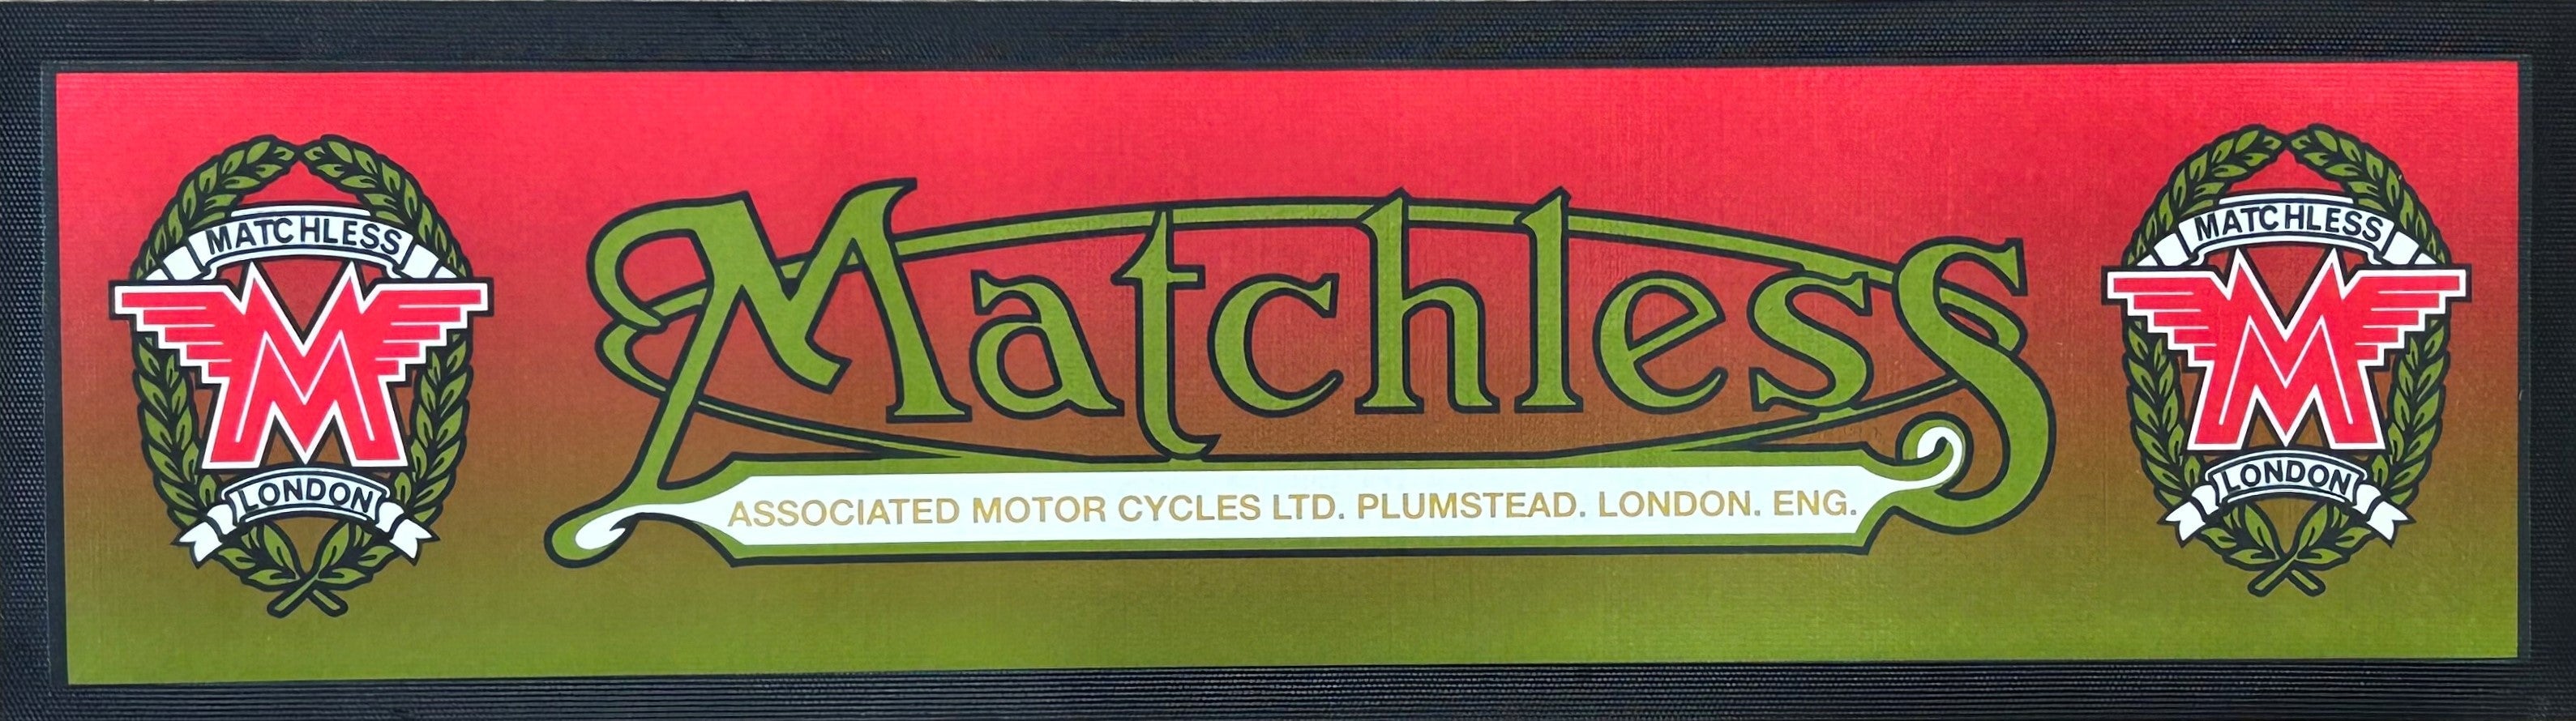 Matchless Motorcycles Premium Rubber-Backed Bar Mat Runner - KING CAVE